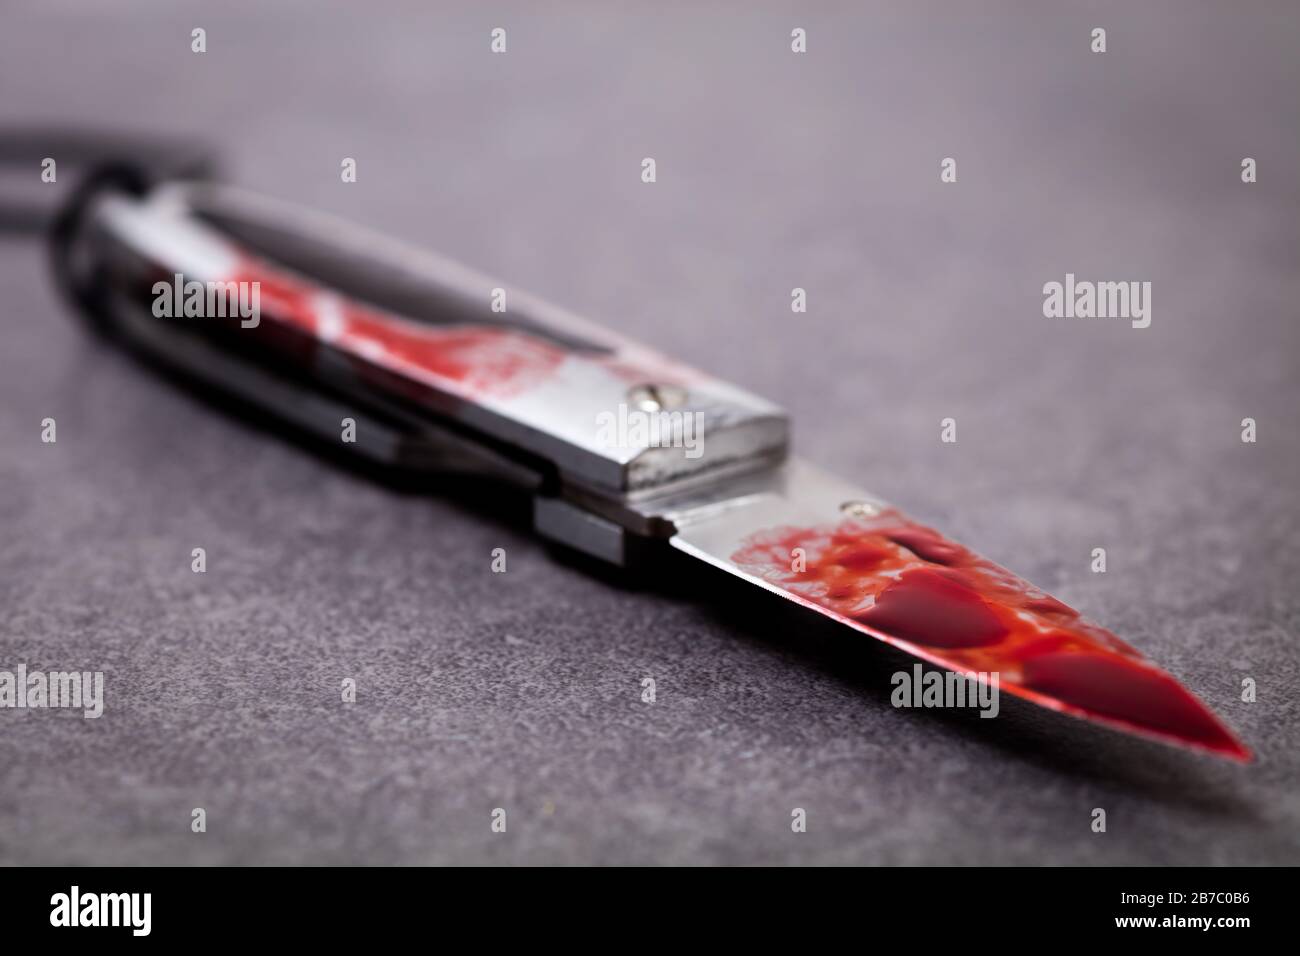 Knife covered in blood. Knife crime and gang related violence. Stock Photo